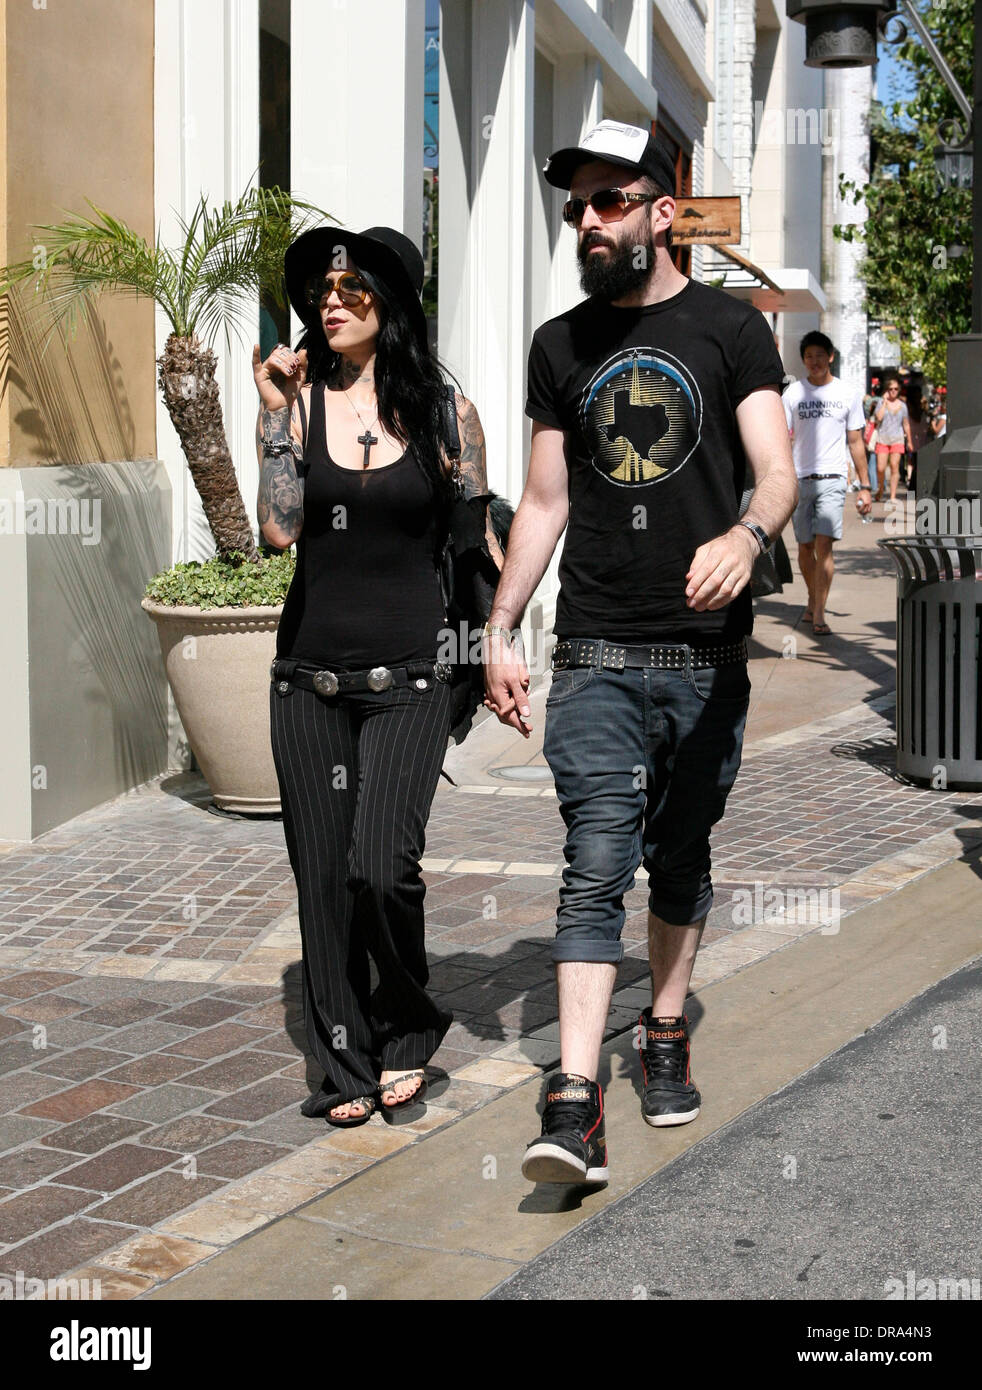 Kat Von D and her new boyfriend, English rapper, Scroobius Pip (real name  David Meads) out and about in West Hollywood West Hollywood, California -  30.06.12 Stock Photo - Alamy